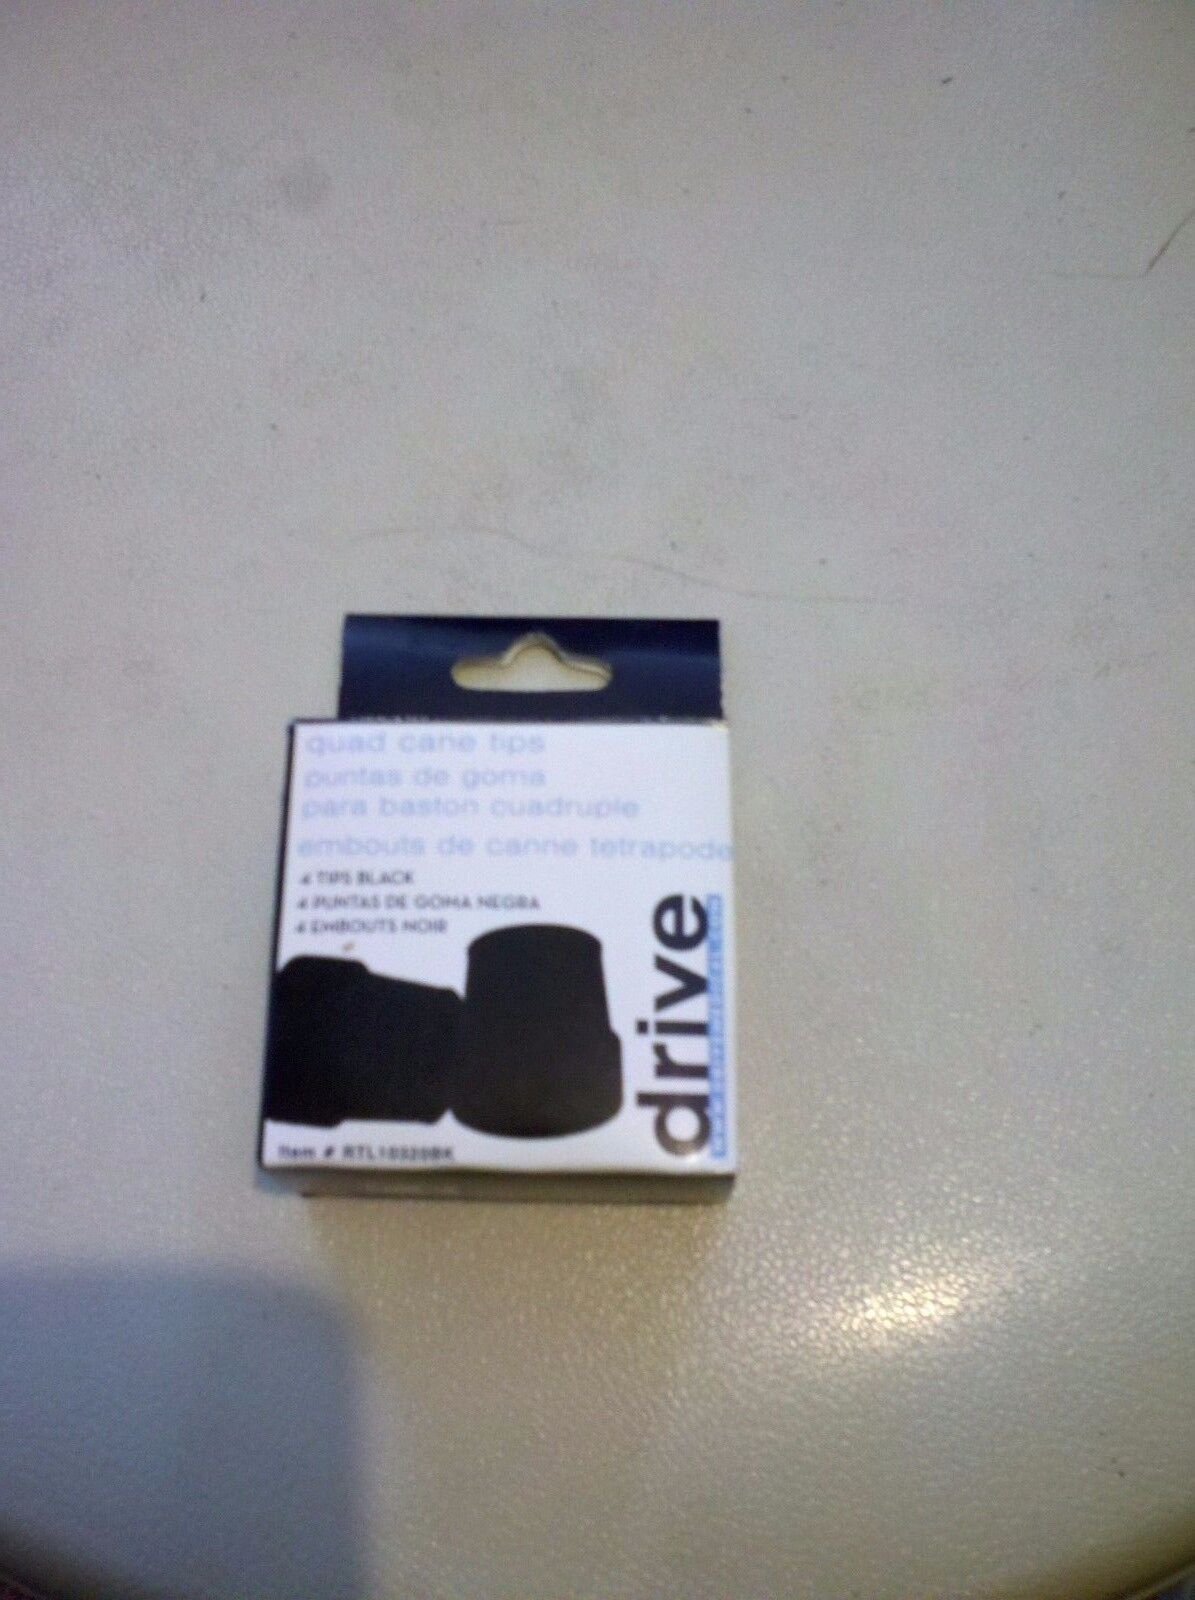 1/2" QUAD CANE TIPS 4 BLACK TIPS BY DRIVE REPLACEMENT TIPS HEAVY-DUTY RUBBER - $10.00